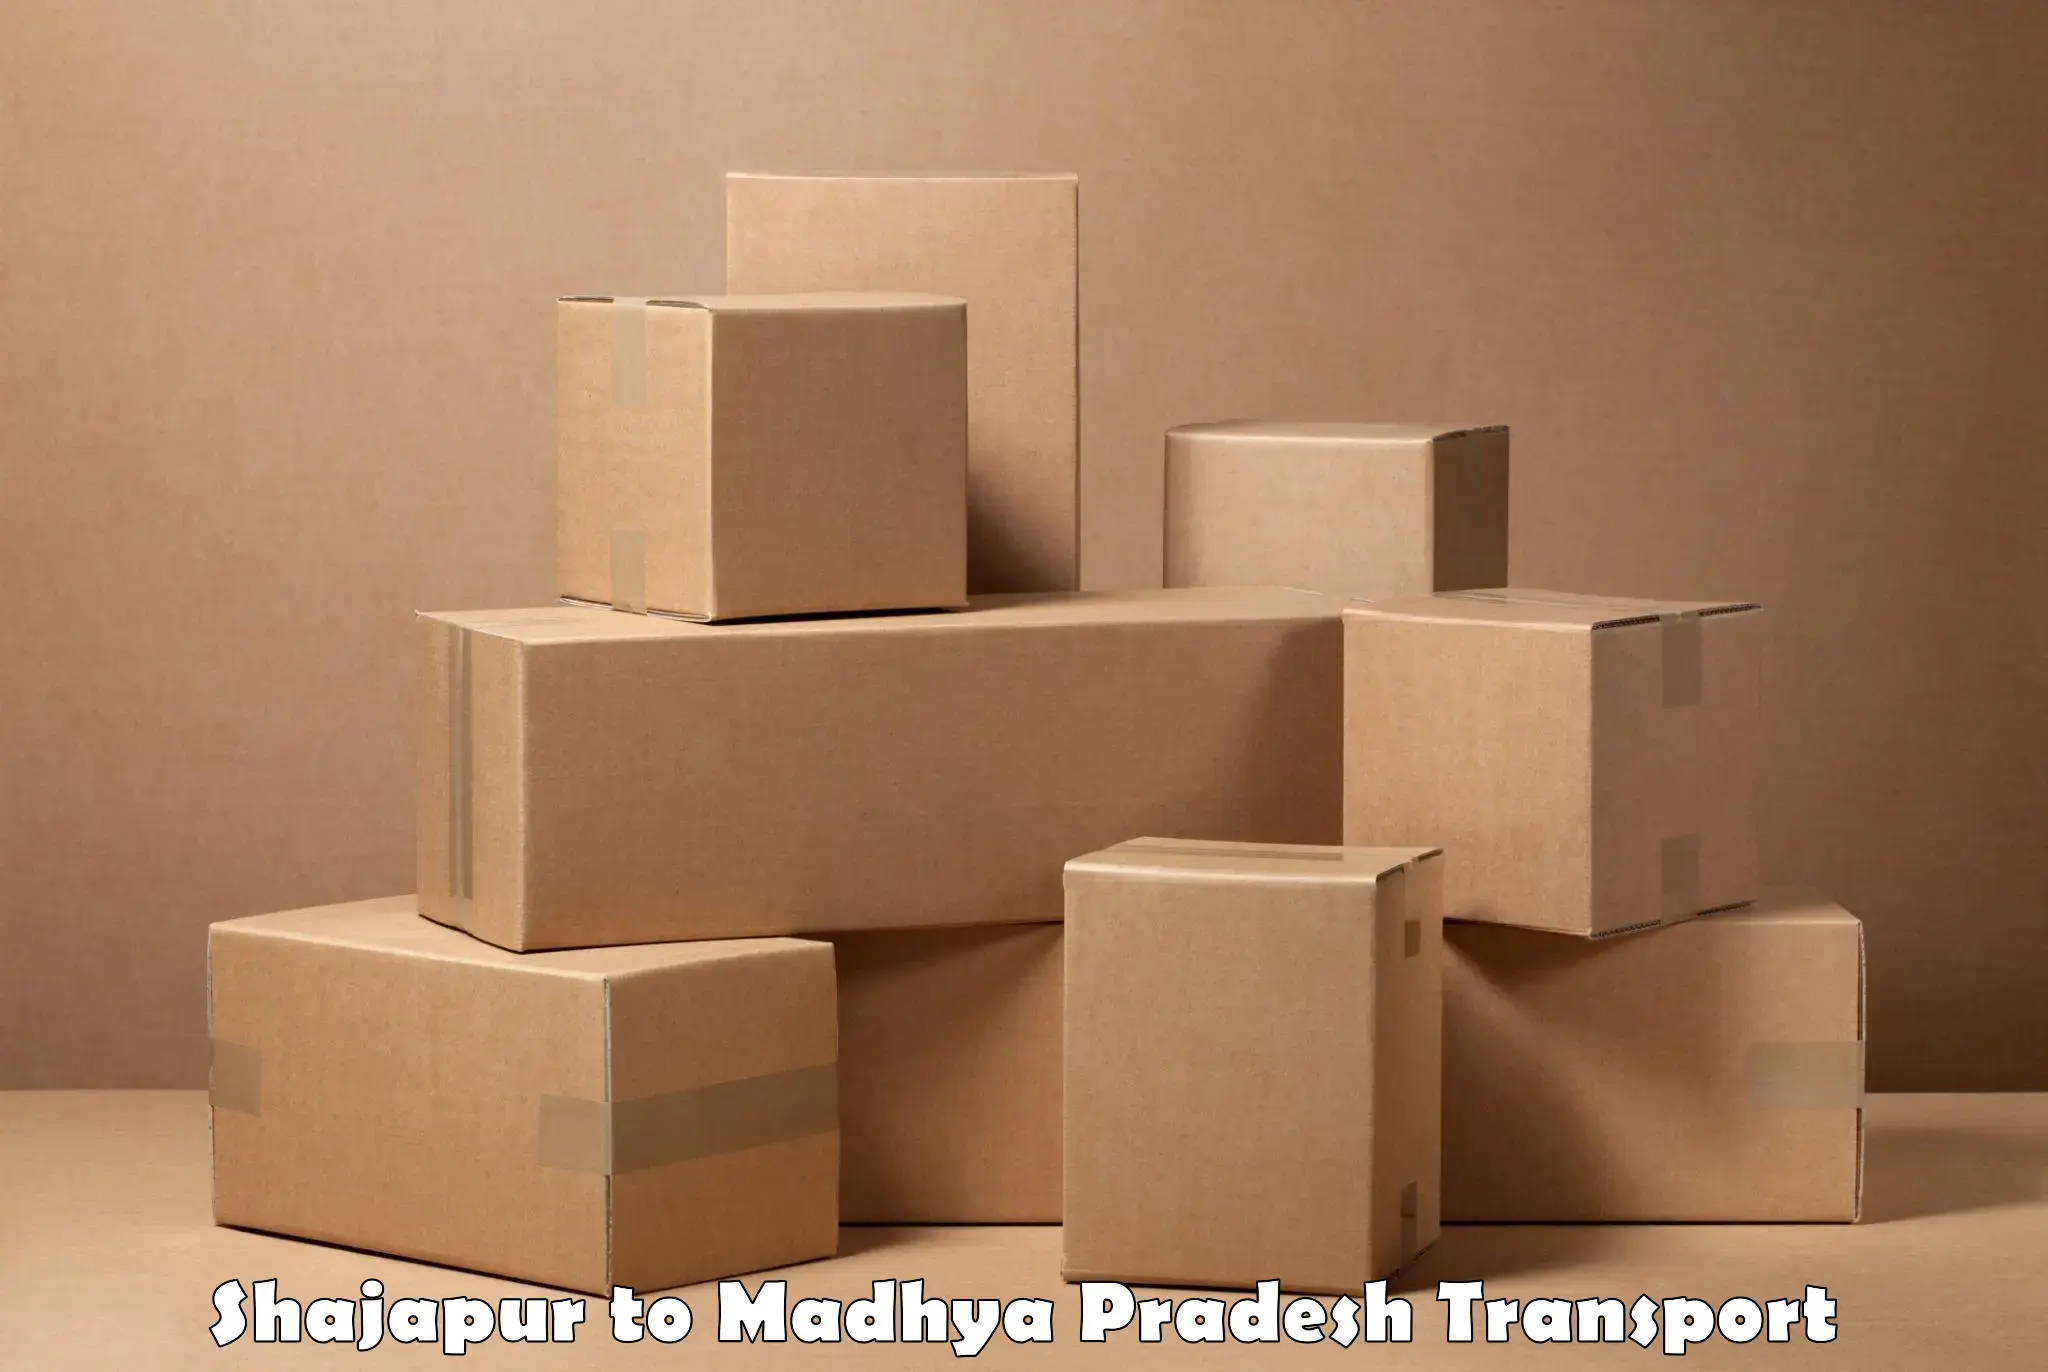 Air freight transport services Shajapur to Neemuch